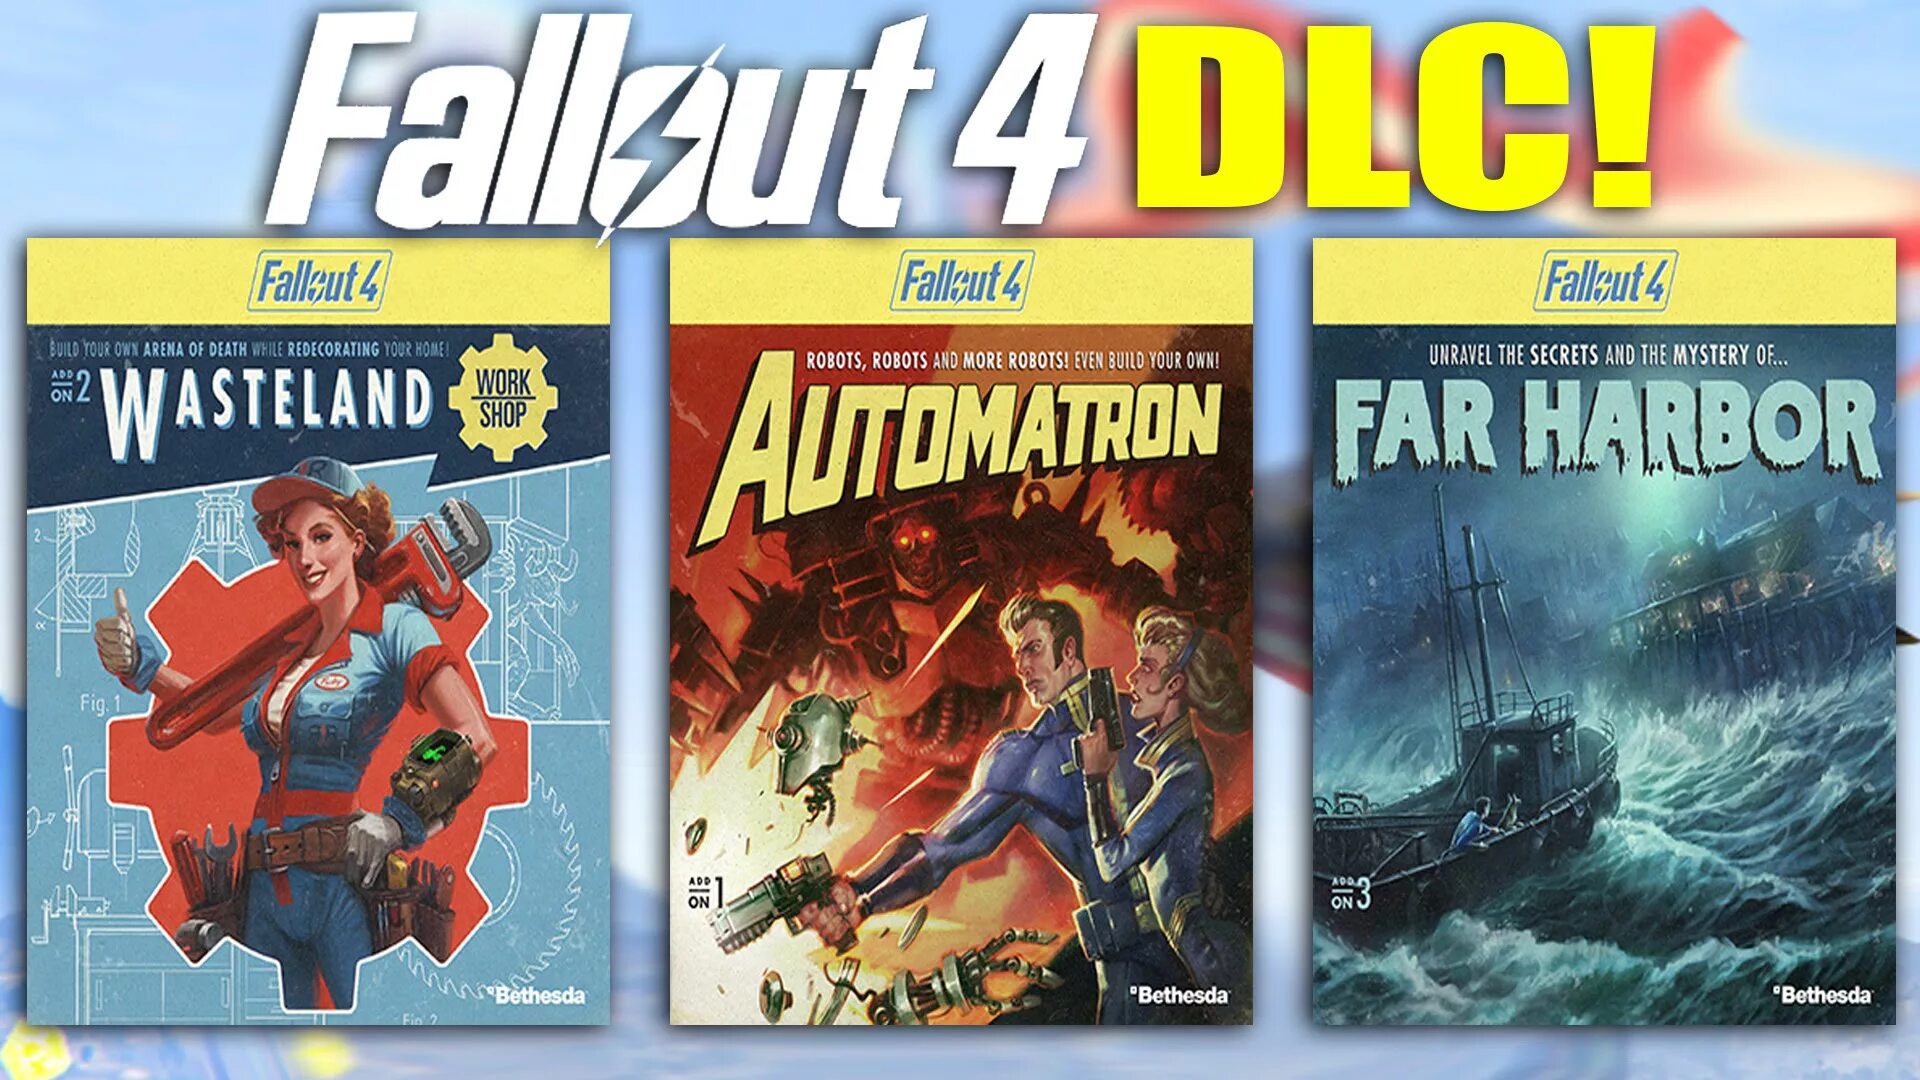 Fallout 4: Automatron. Фоллаут 4 дополнения. Fallout 4 - Automatron DLC. Fallout 4 [ps4].